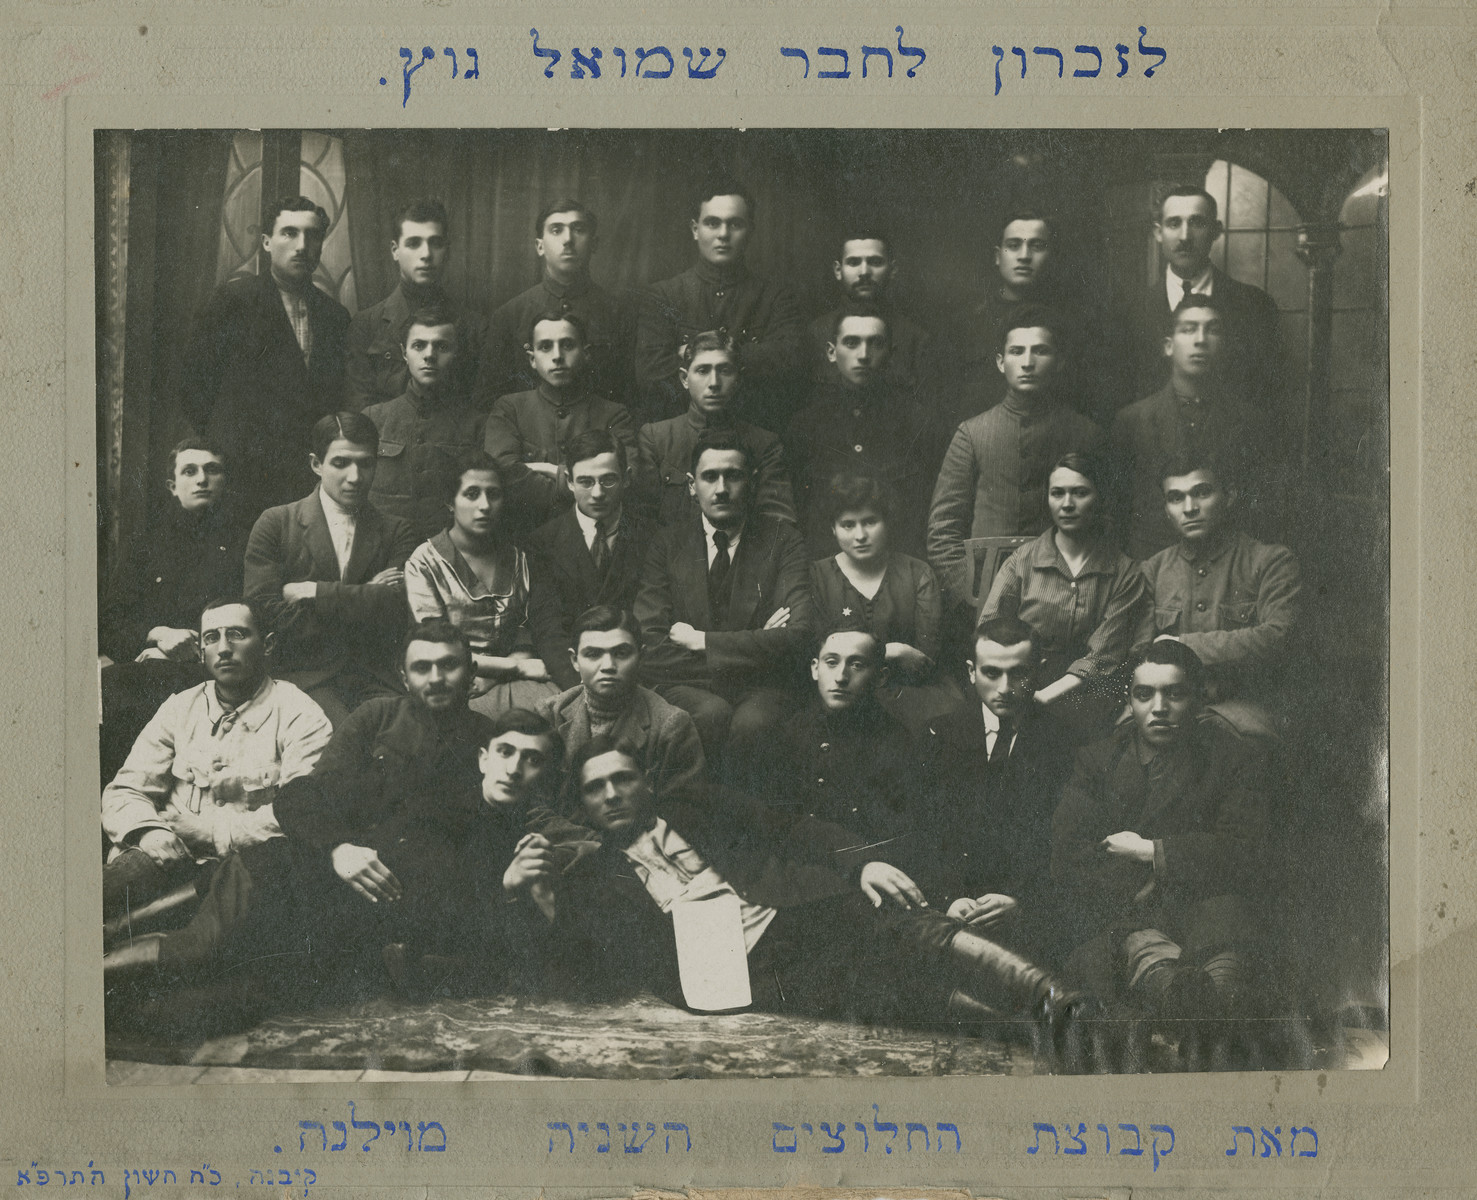 Group portrait of Lithuanian Jewish Zionist.

The original caption reads: "As a remembrance to our comrade Shmuel Gotz.  From the second group of pioneers from Vilna, Kaunas 1920."

Samuel Gotz is pictured in the second row, center with his arms folded.